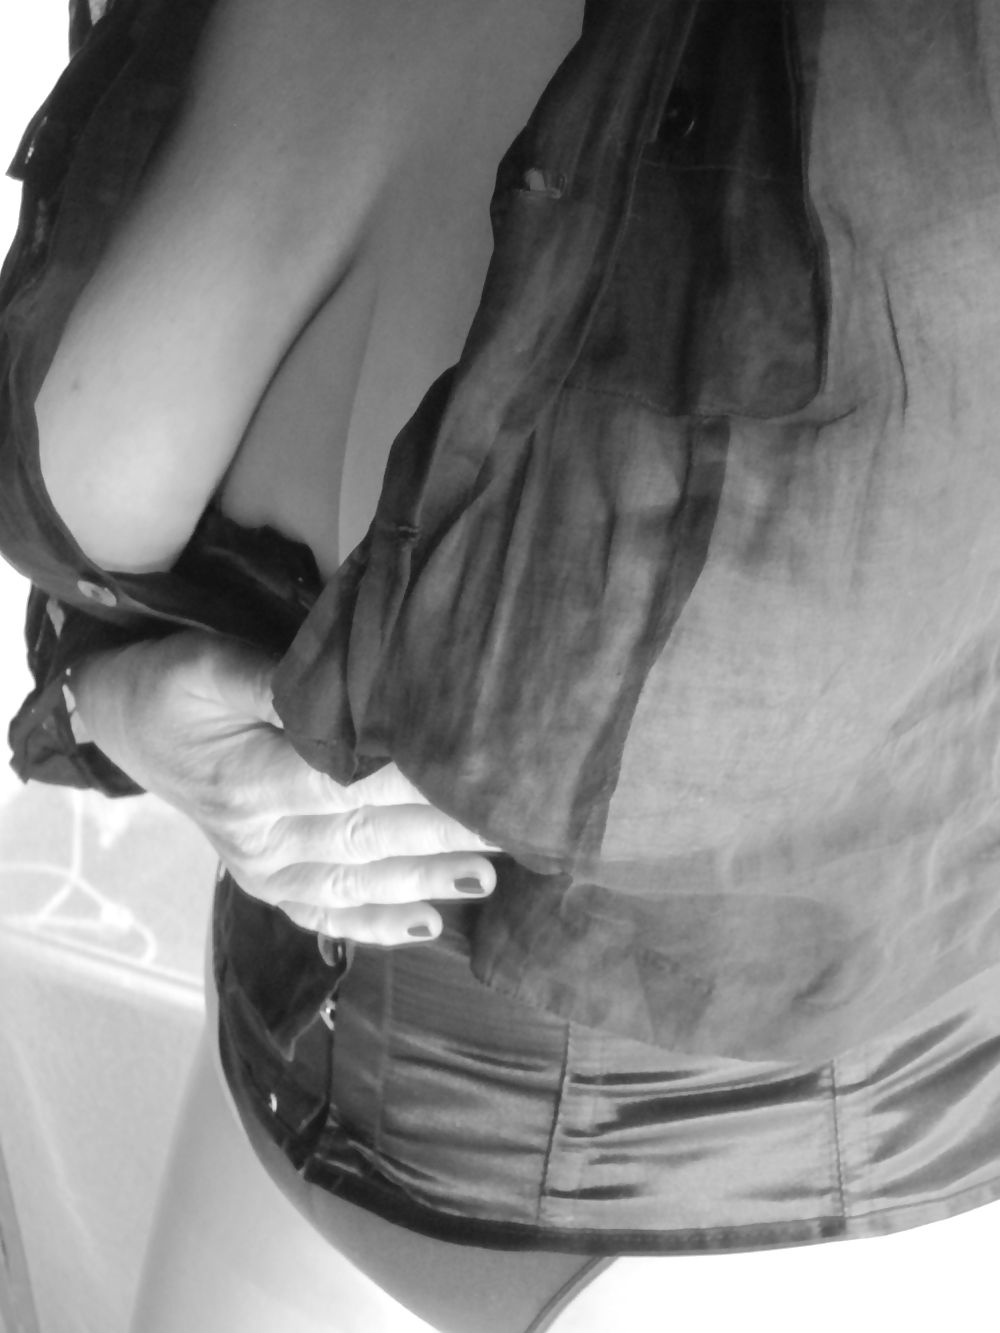 Black and white 08.11.12 adult photos